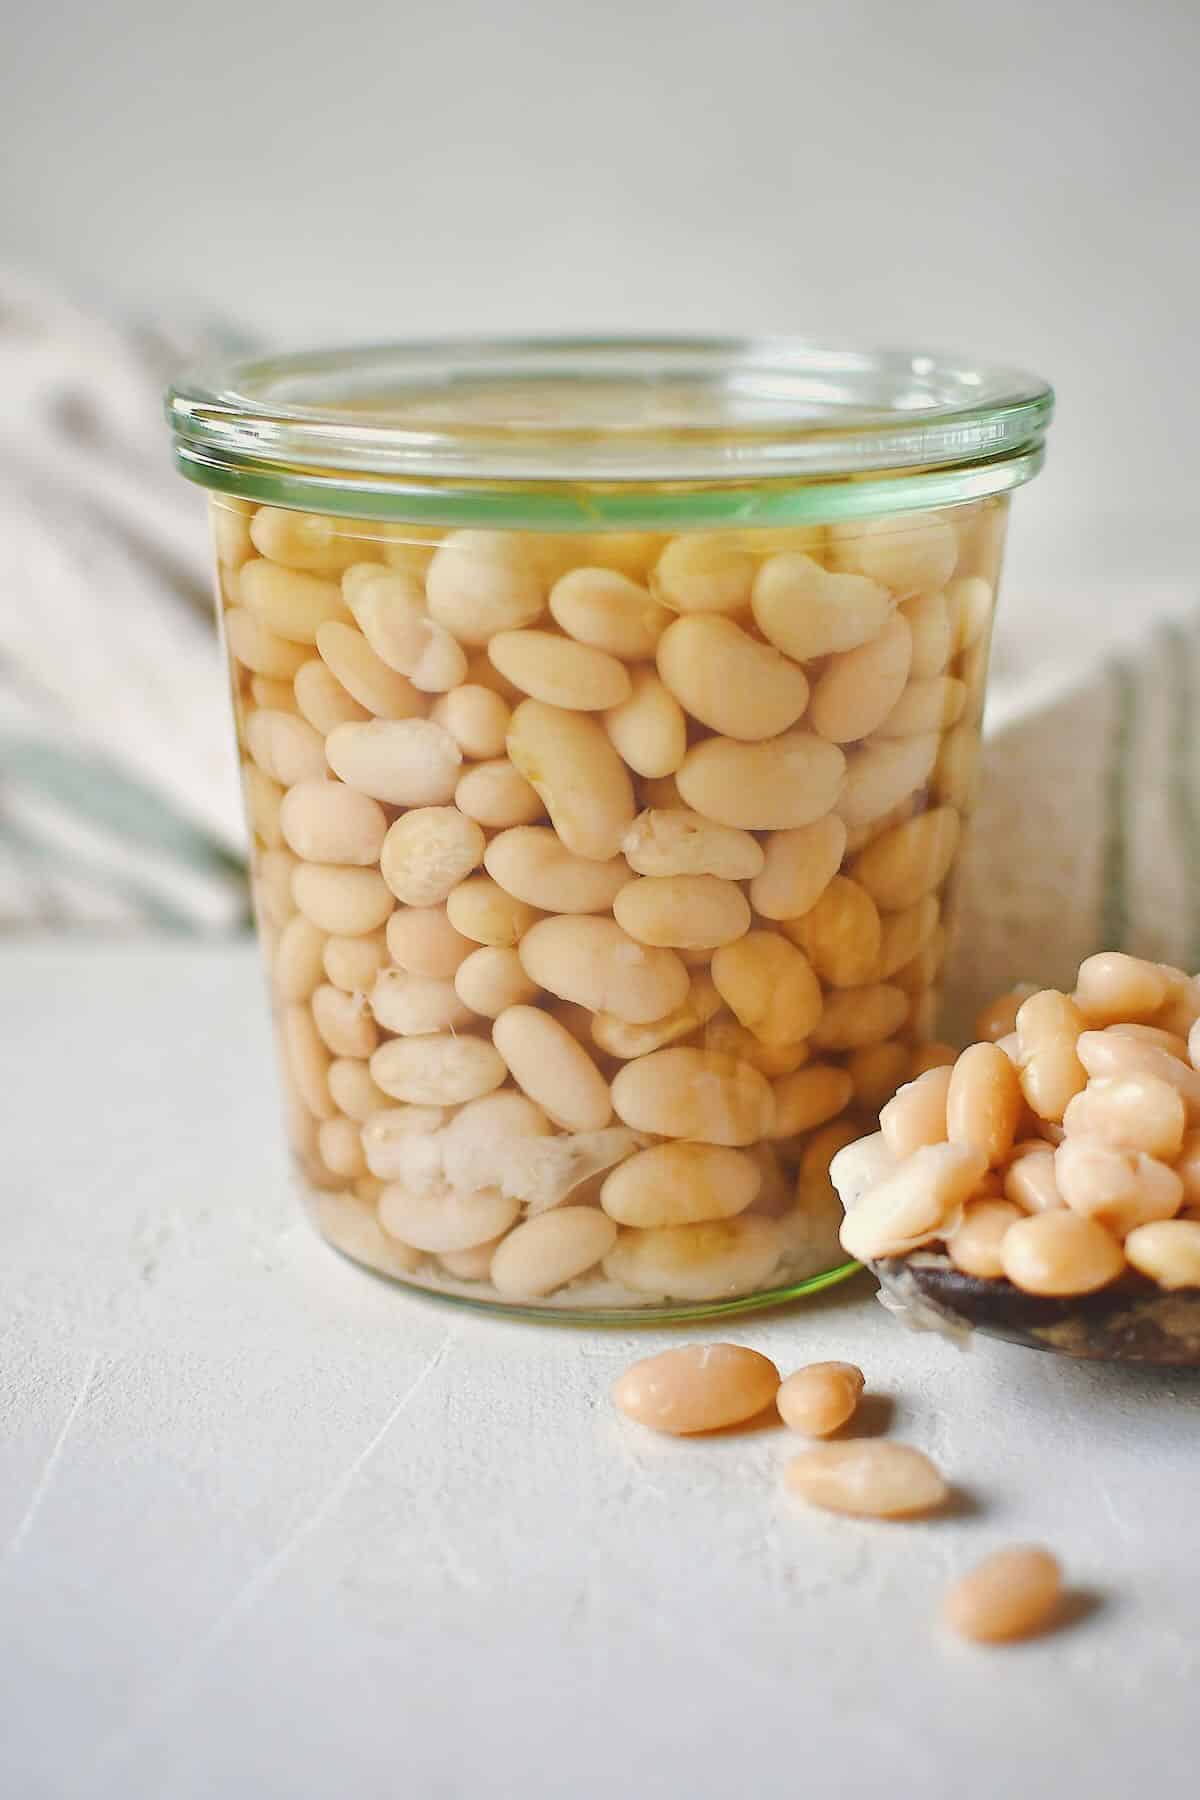 Cooked beans, stored in a glass jar for later use. some laying in a spoon on the table on the side of the jar.